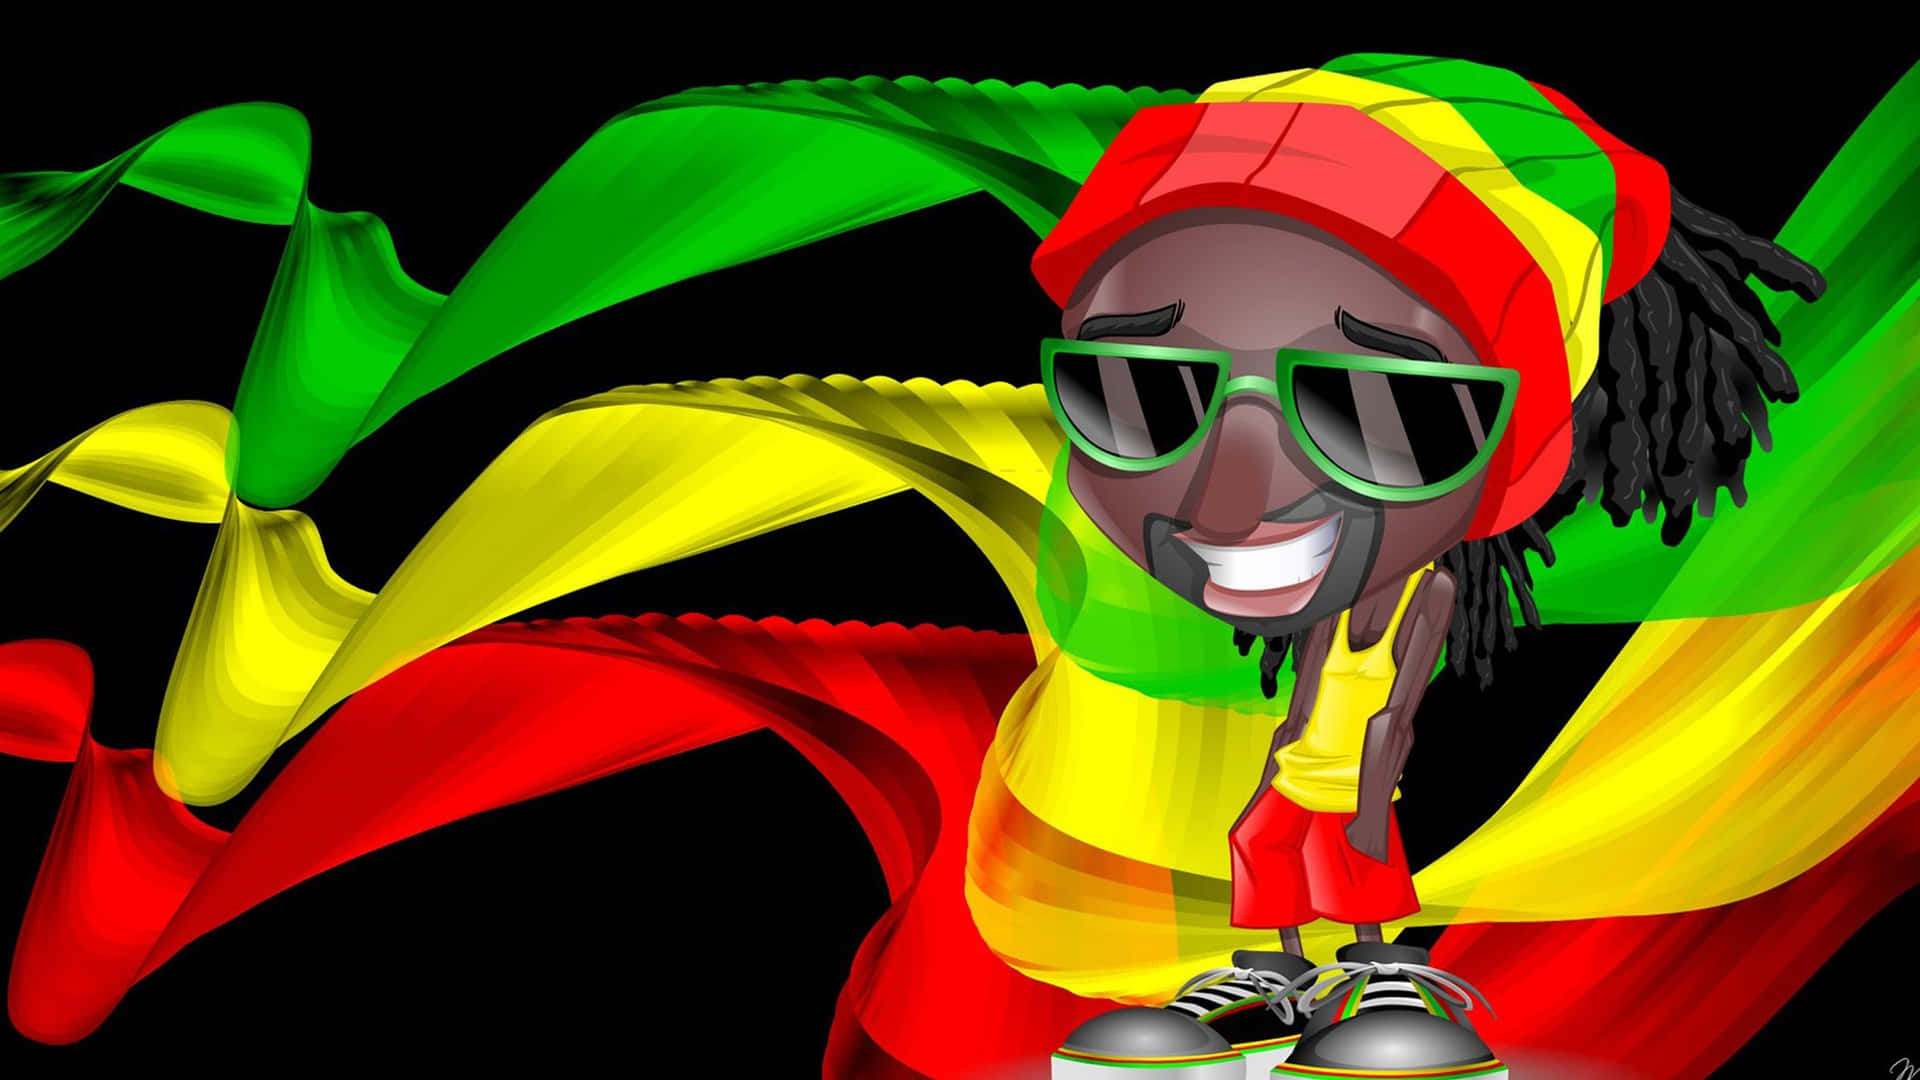 Reggae music and the Rastafarian culture are loved all over the world. Wallpaper